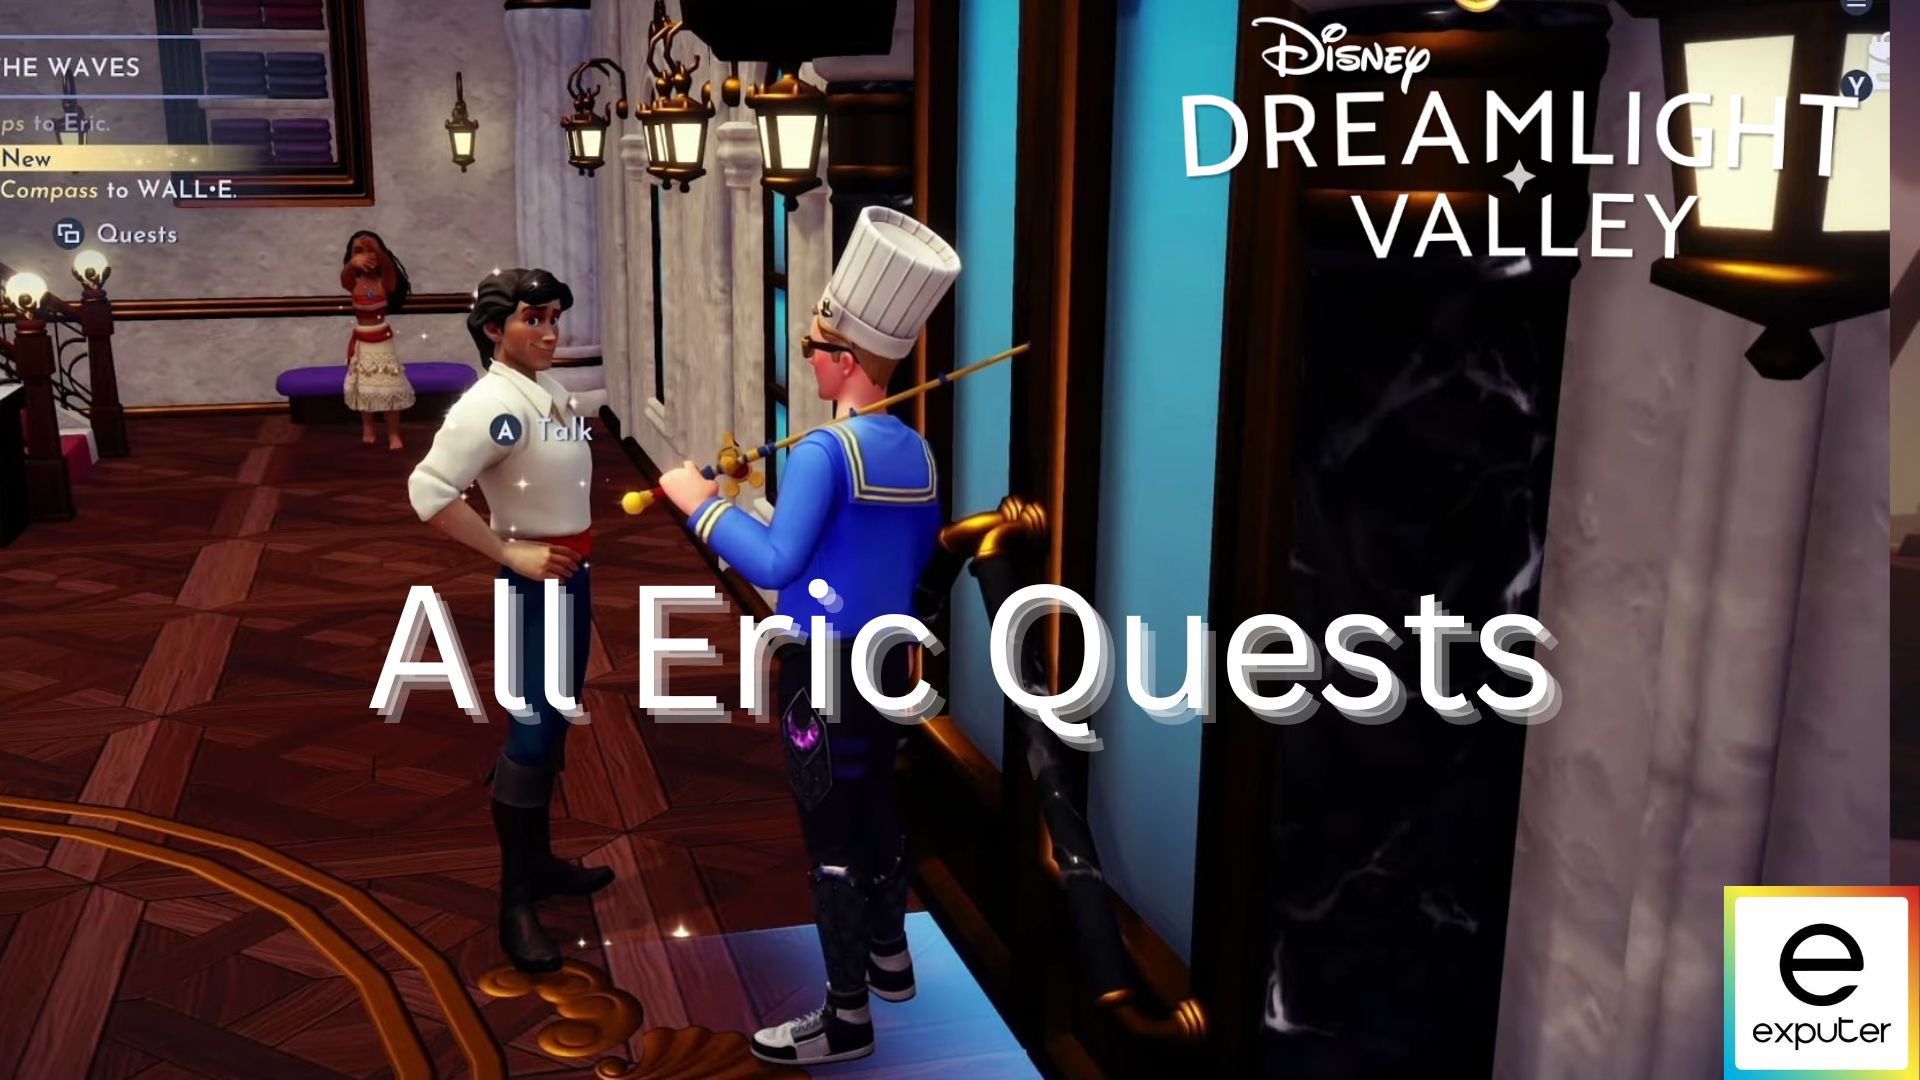 Eric Quests in Disney Dreamlight Valley